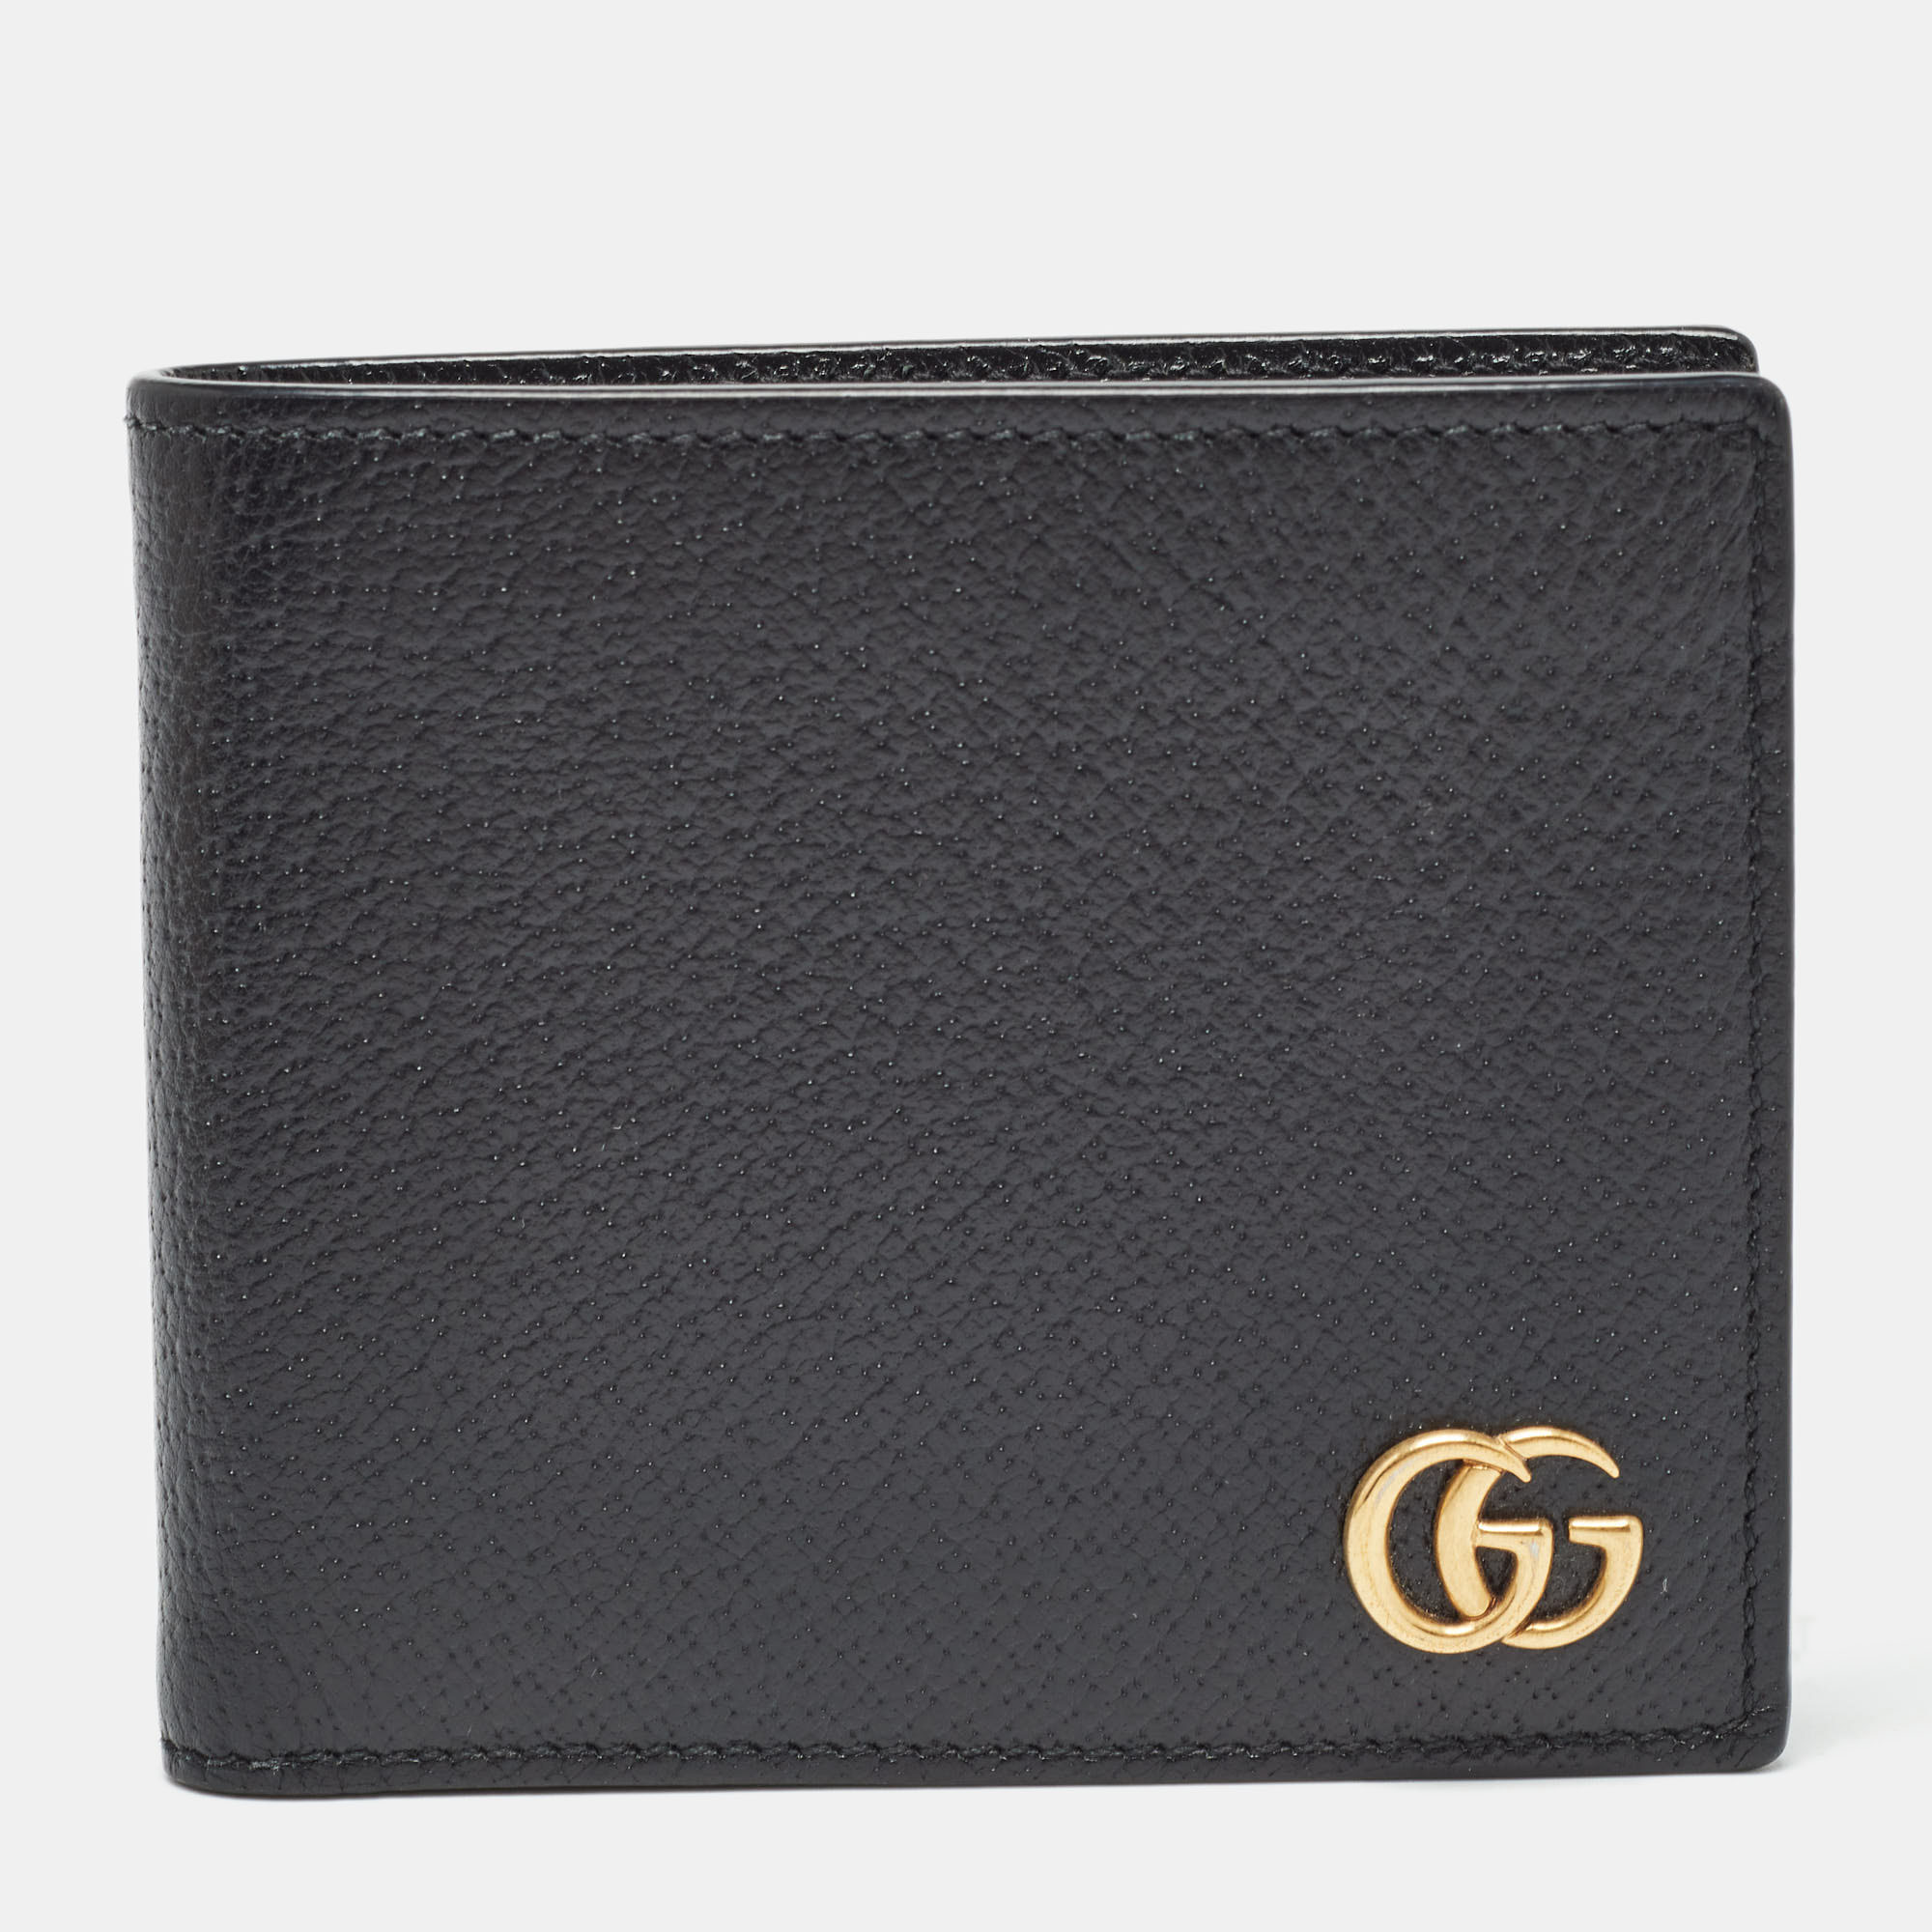 

Gucci Black Leather GG Marmont Bifold Wallet